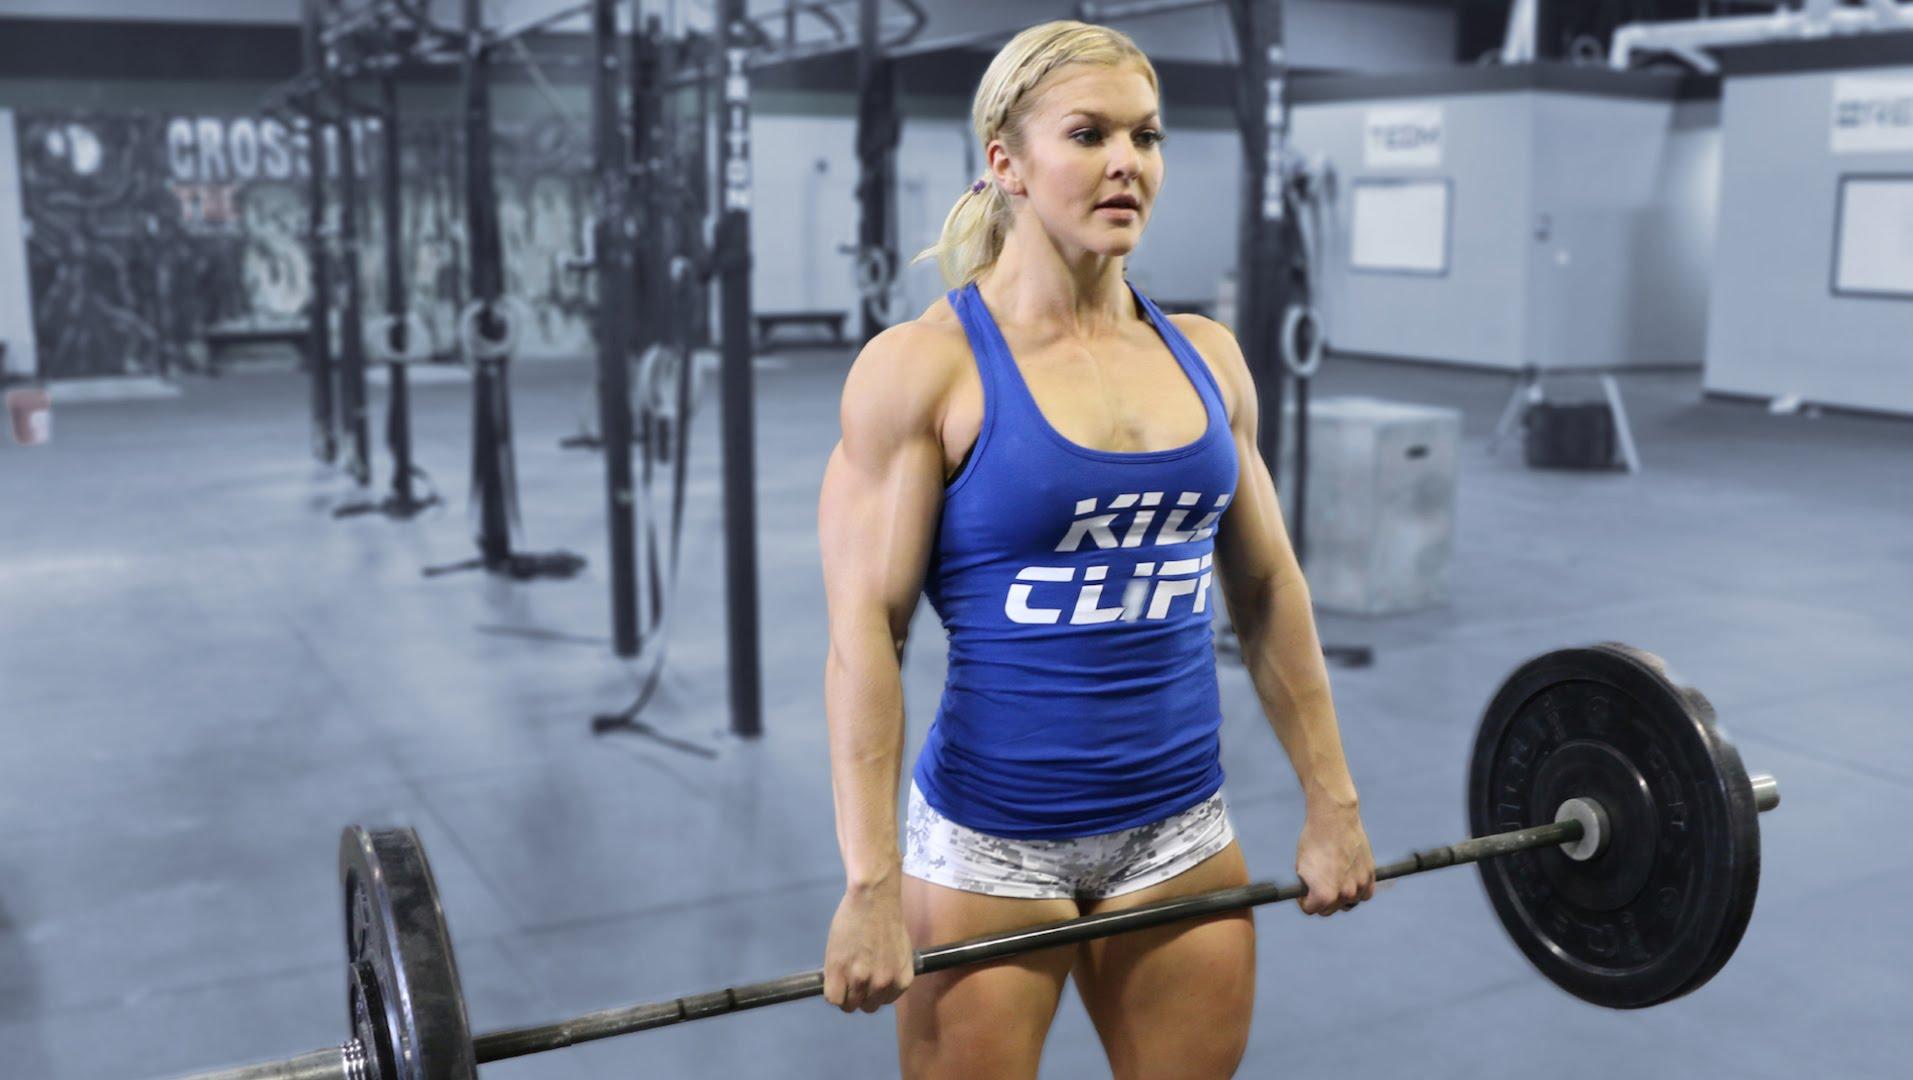 Hot Picture Of Brooke Ence Gorgeous Crossfit